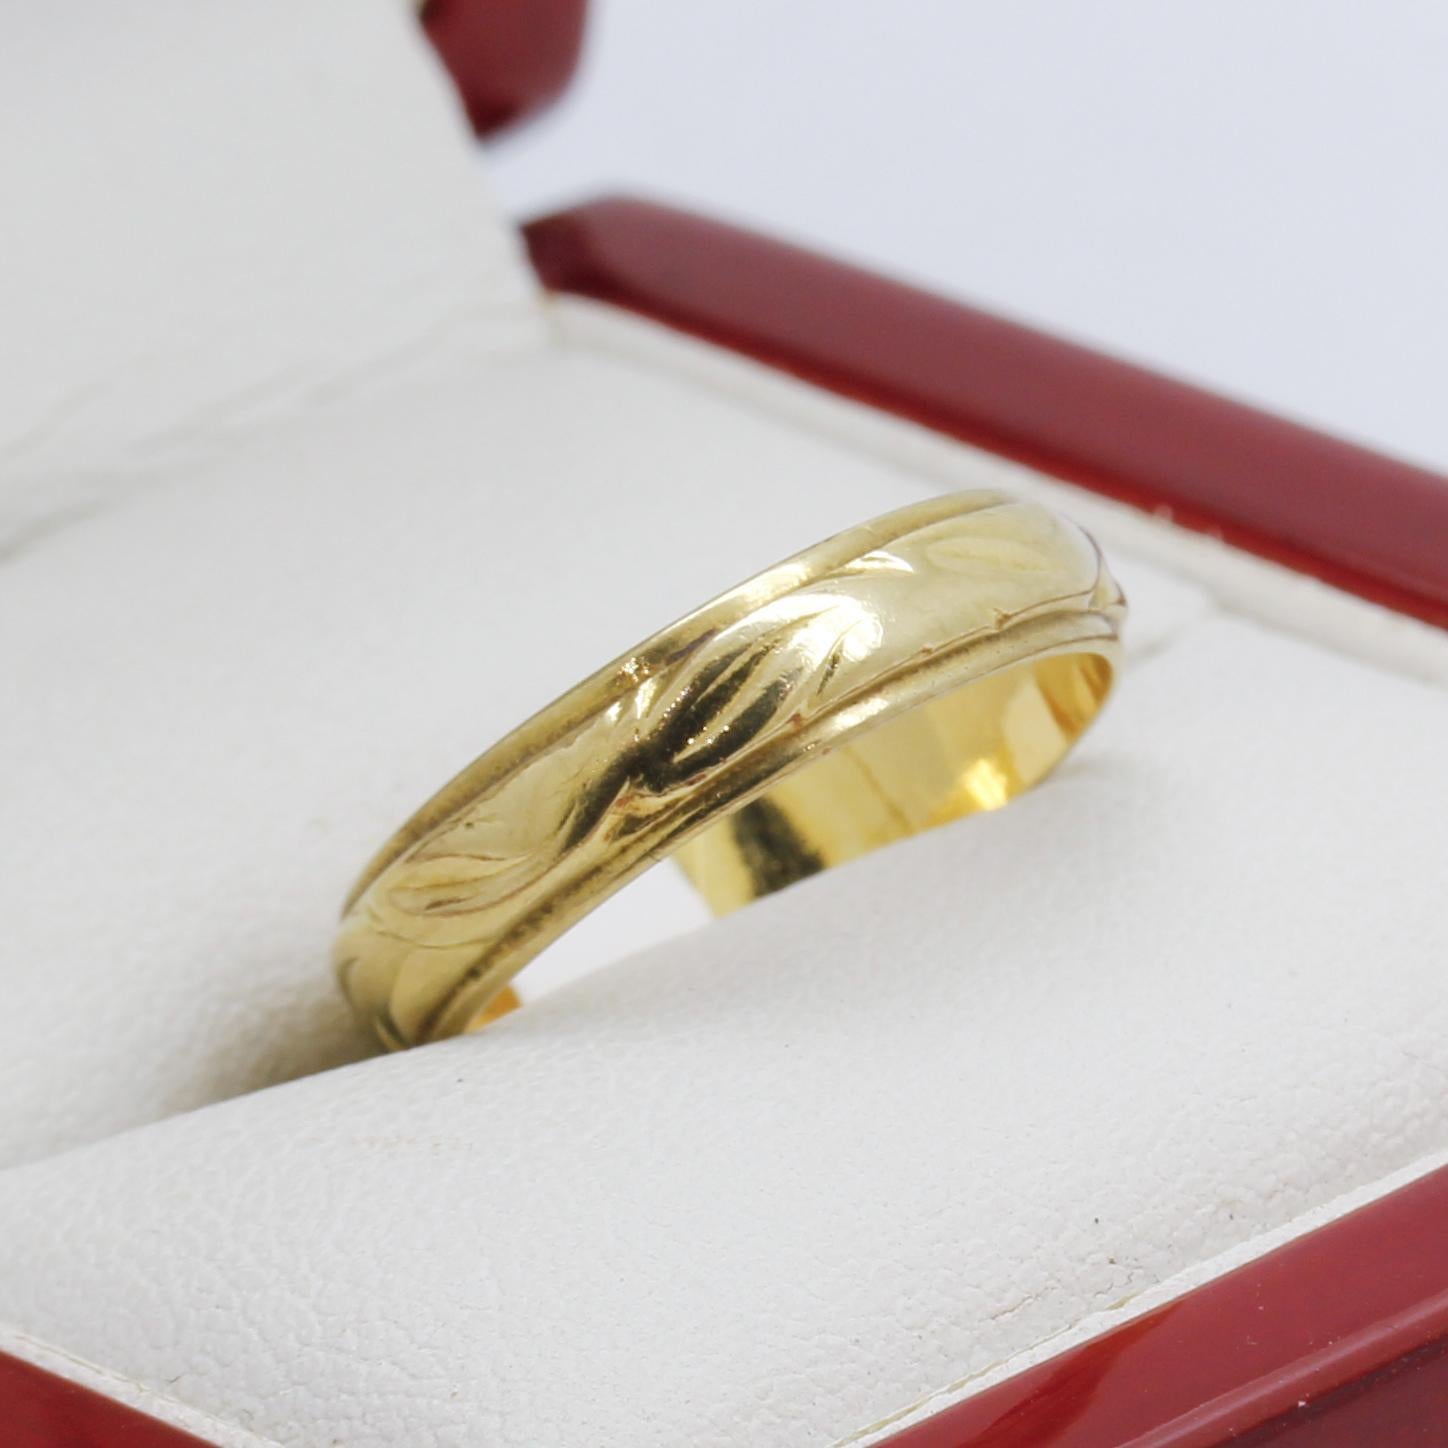 Vintage 18ct Yellow gold ring (fancy band) 
Marked 18CT
Width 4.2mm
Thickness 1.3mm
Weight 3.55 grams
Ring size N